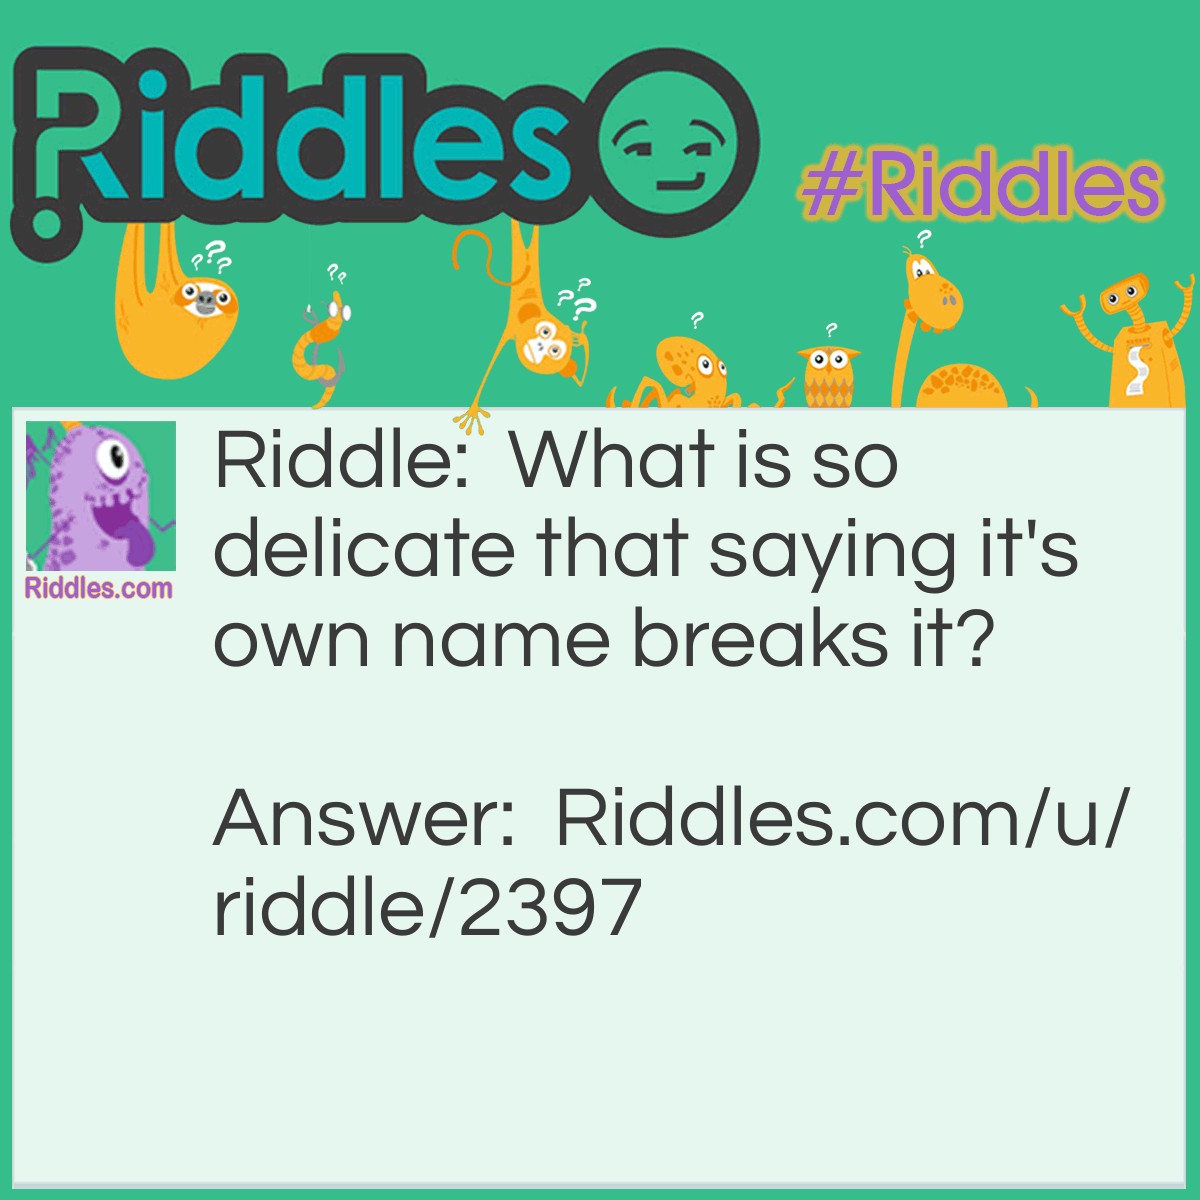 Riddle: What is so delicate that saying it's own name breaks it? Answer: Silence.